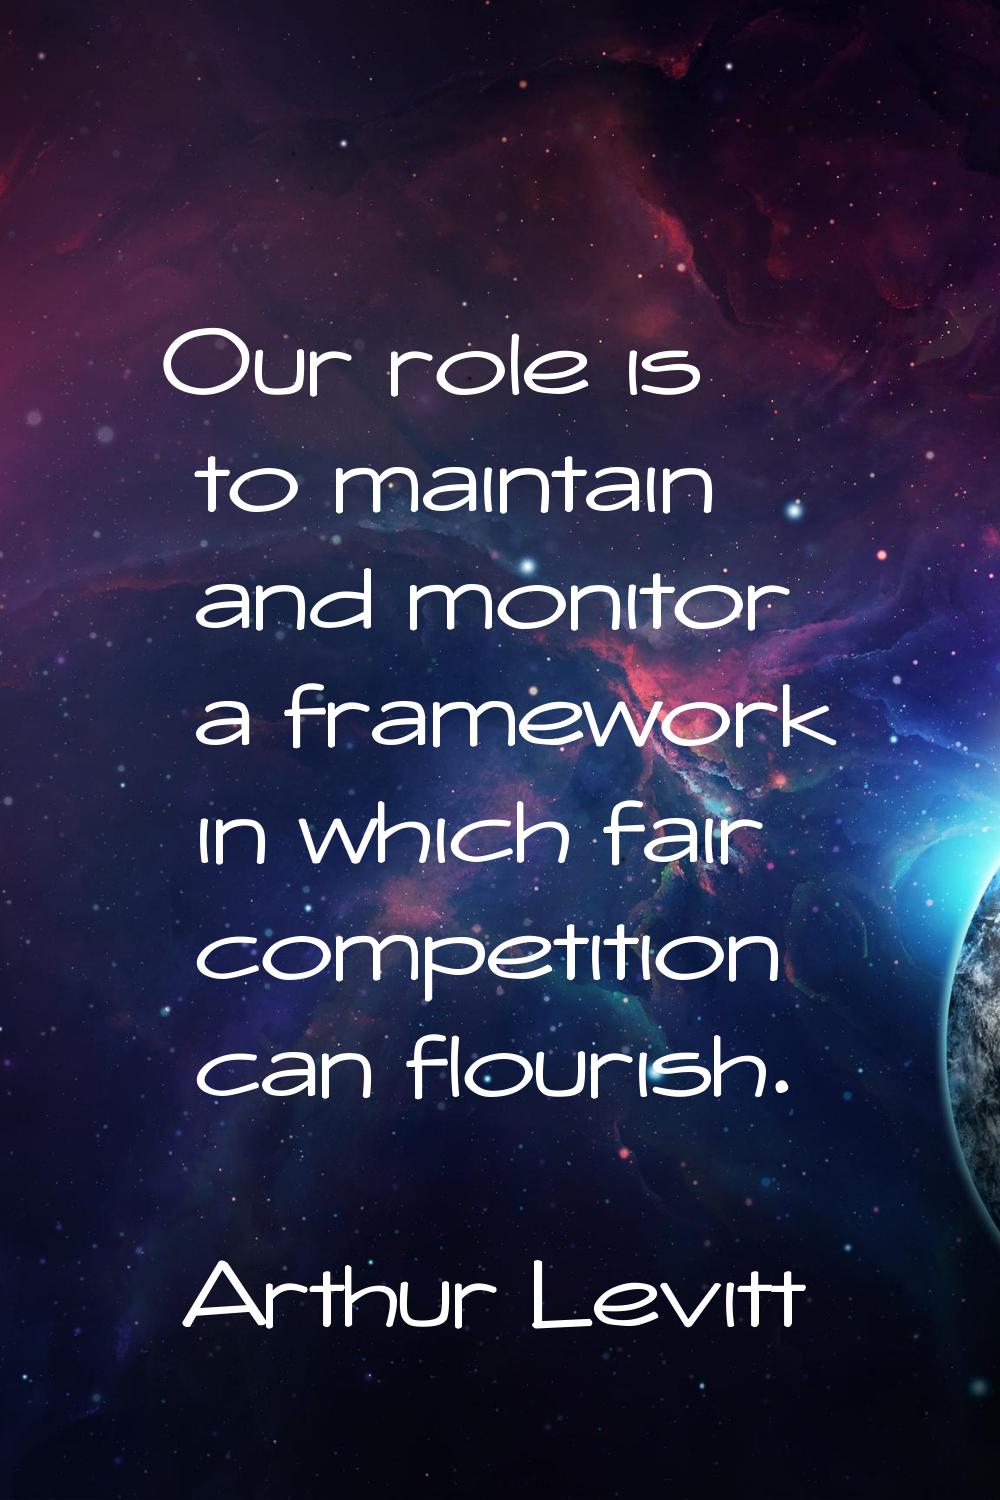 Our role is to maintain and monitor a framework in which fair competition can flourish.